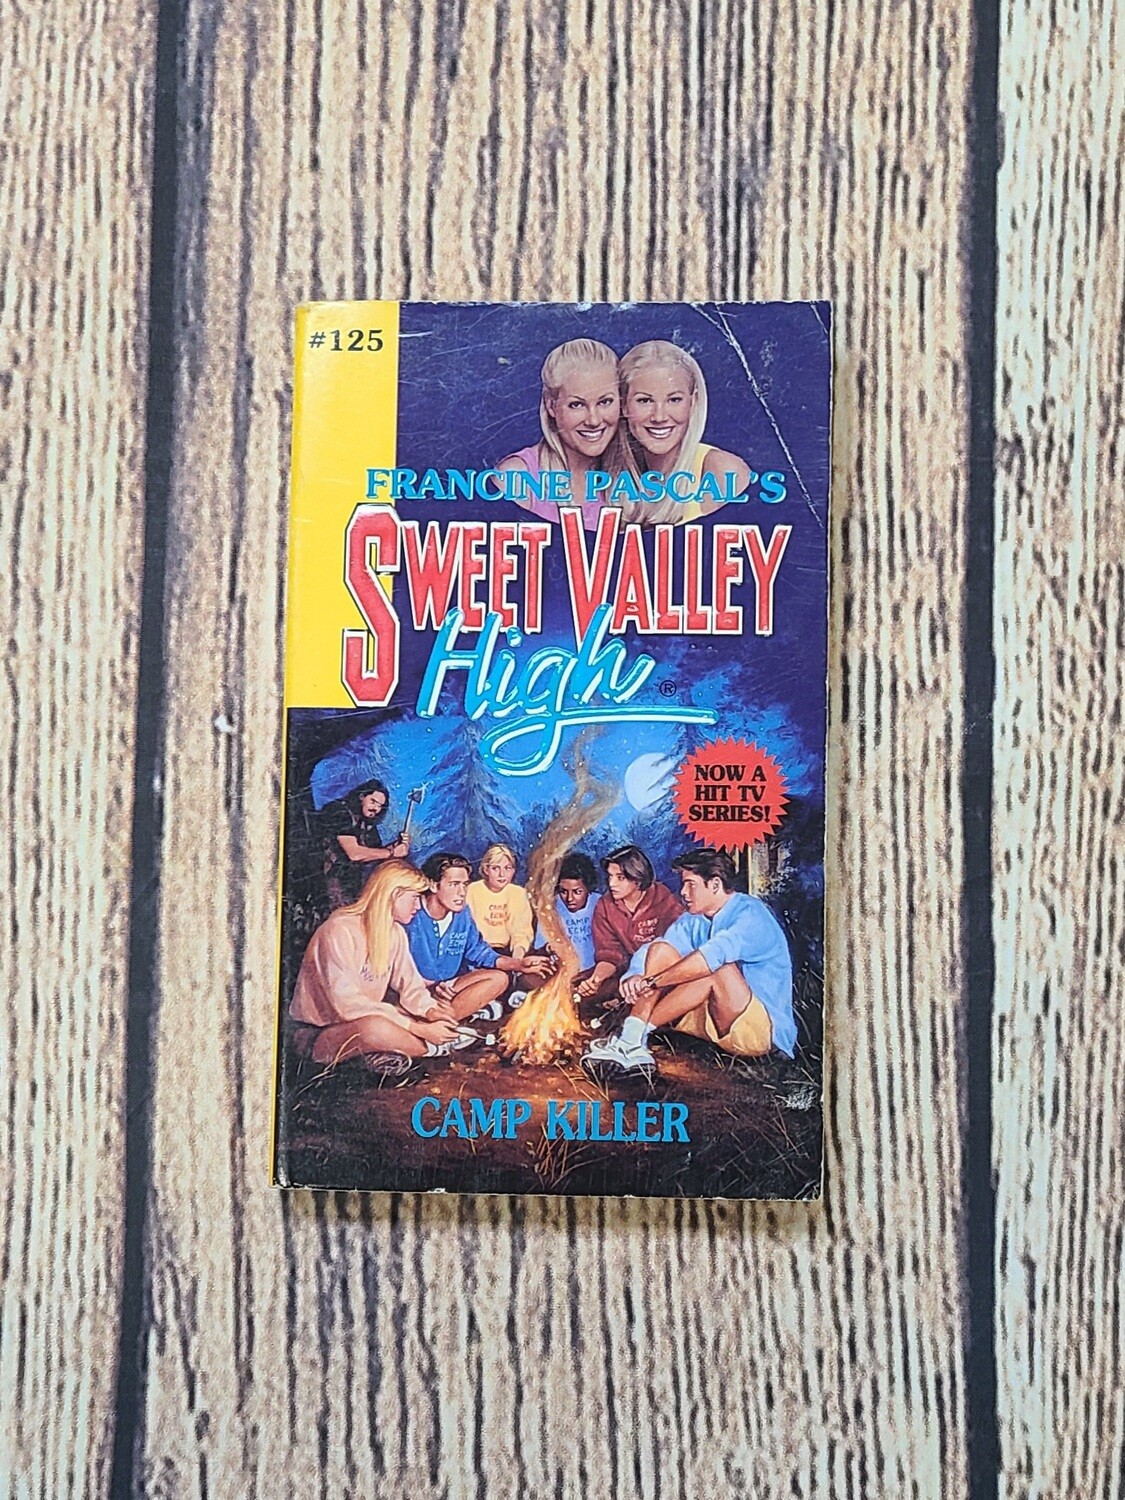 Sweet Valley High: Camp Killer by Francine Pascal